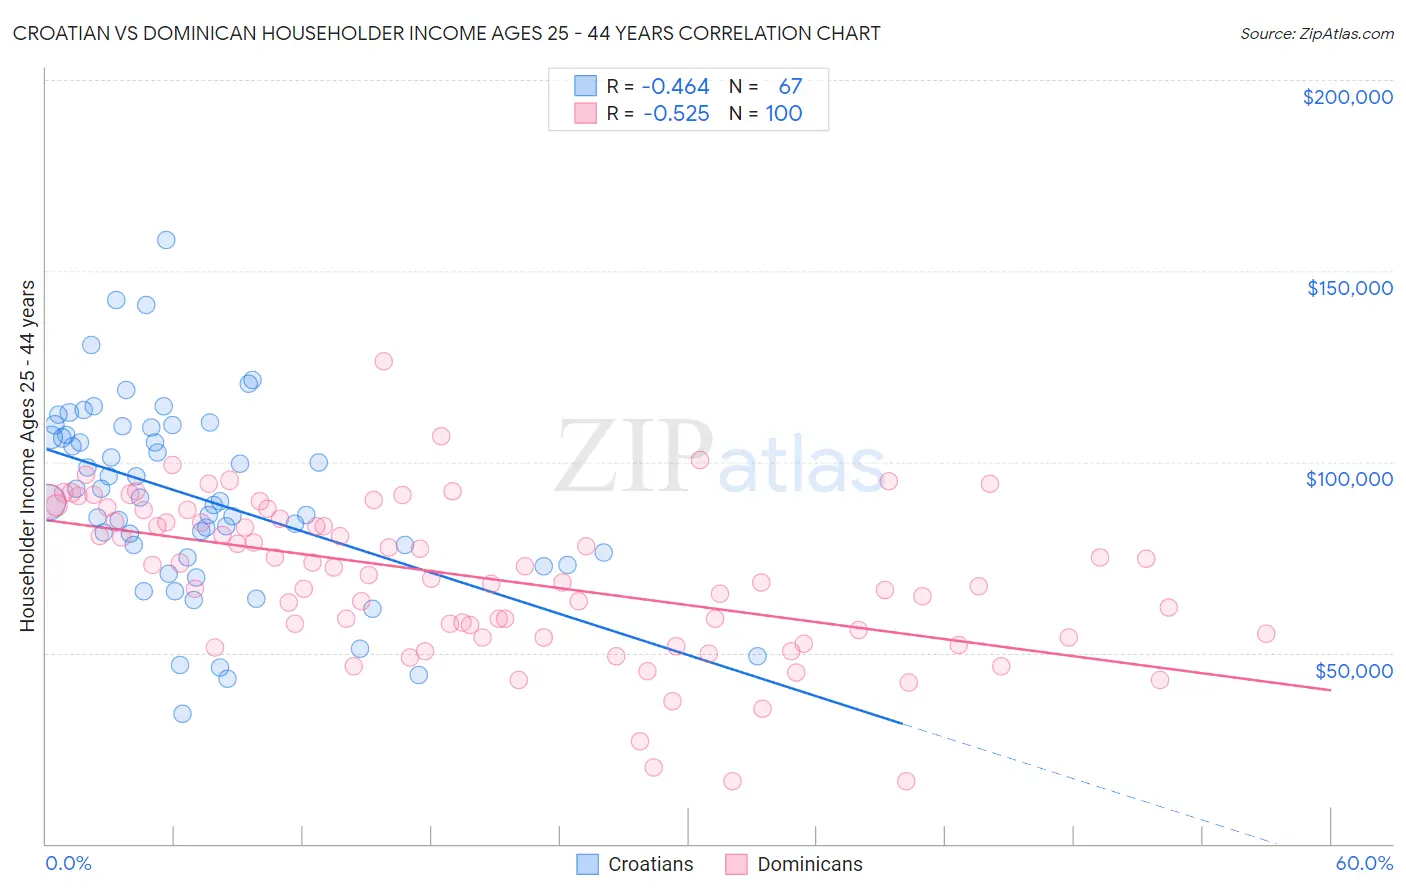 Croatian vs Dominican Householder Income Ages 25 - 44 years